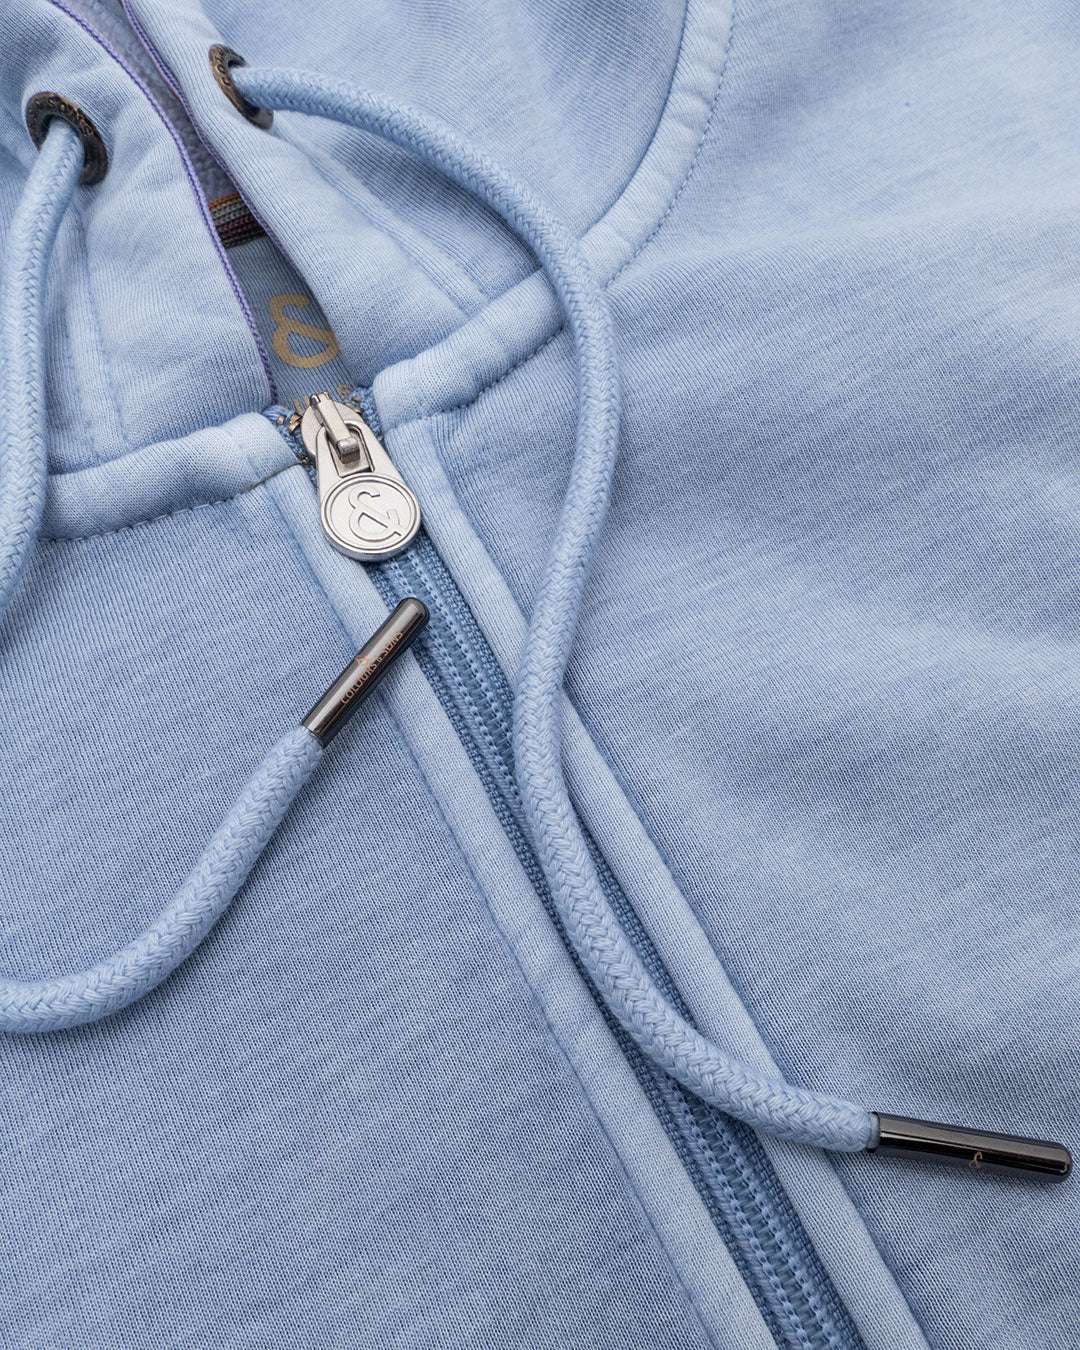 Hoodie-Zip Pigment Dyed in Stone Sweatjacken Colours and Sons   